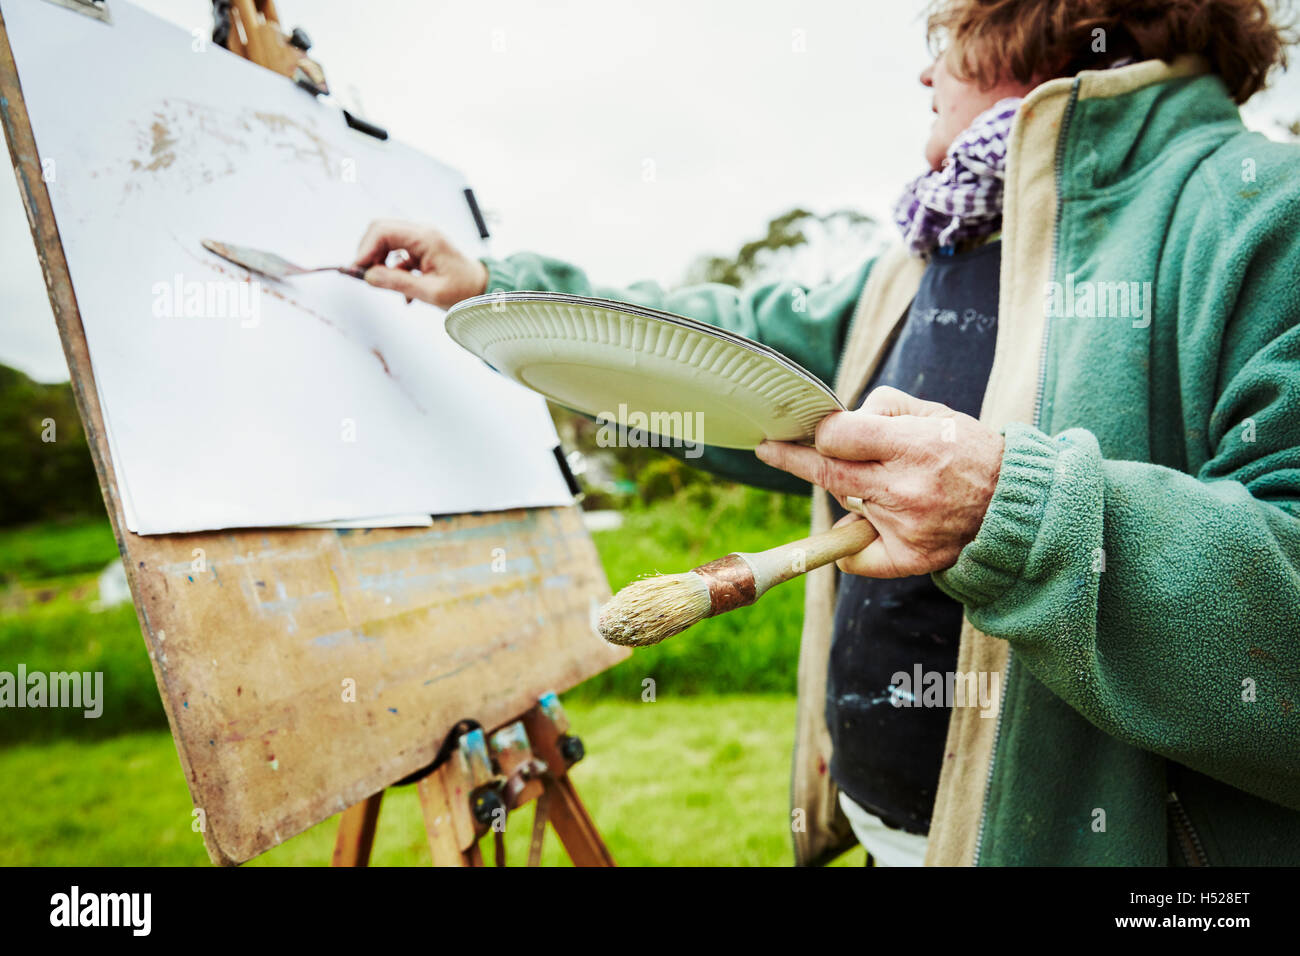 A woman artist working at her easel outdoors, applying paint with a hand tool. Stock Photo